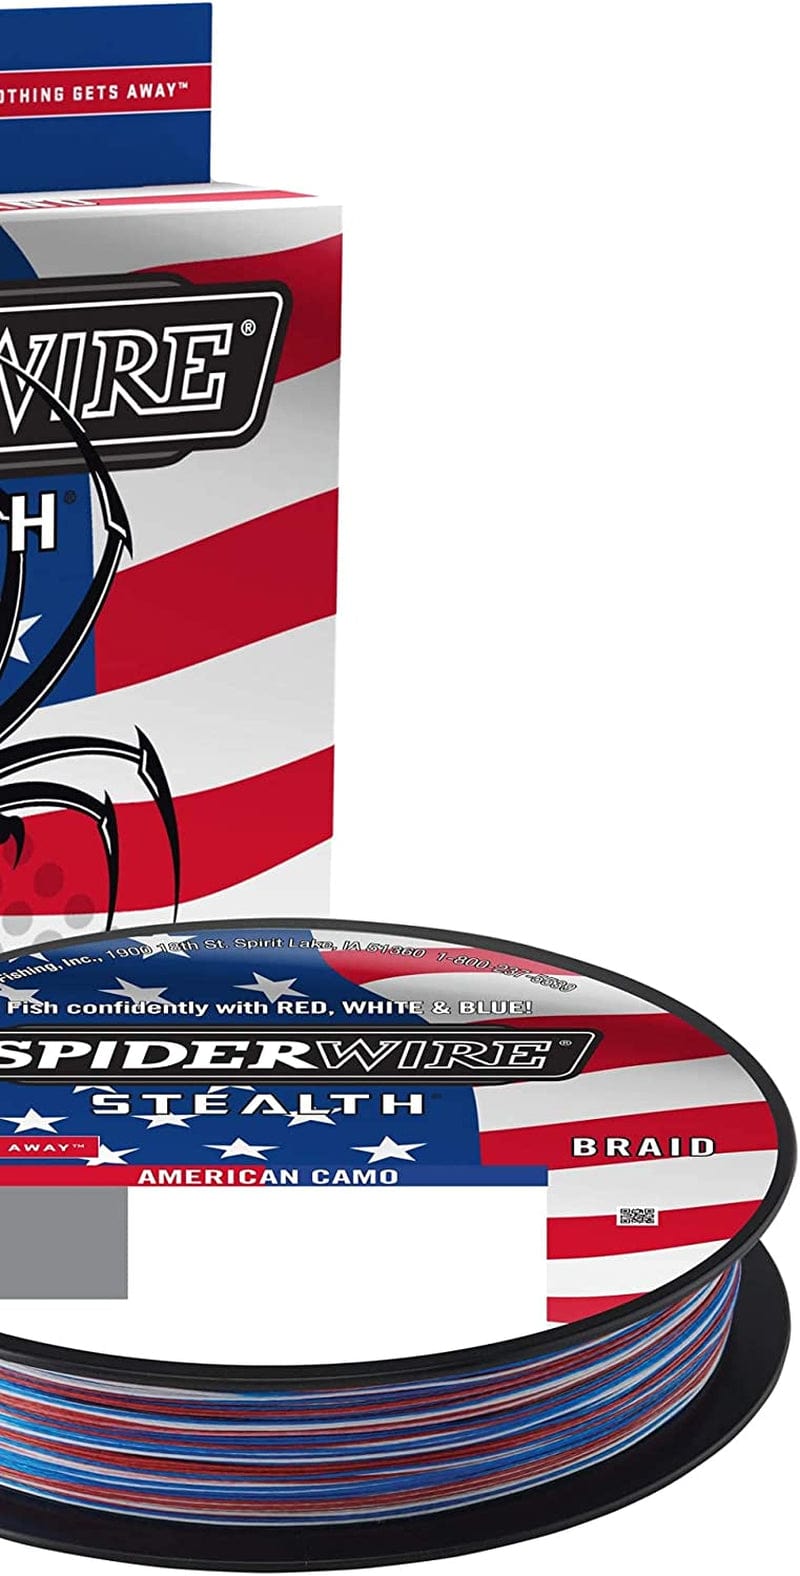 Spiderwire Stealth Braid Fishing Line Sporting Goods > Outdoor Recreation > Fishing > Fishing Lines & Leaders Pure Fishing   